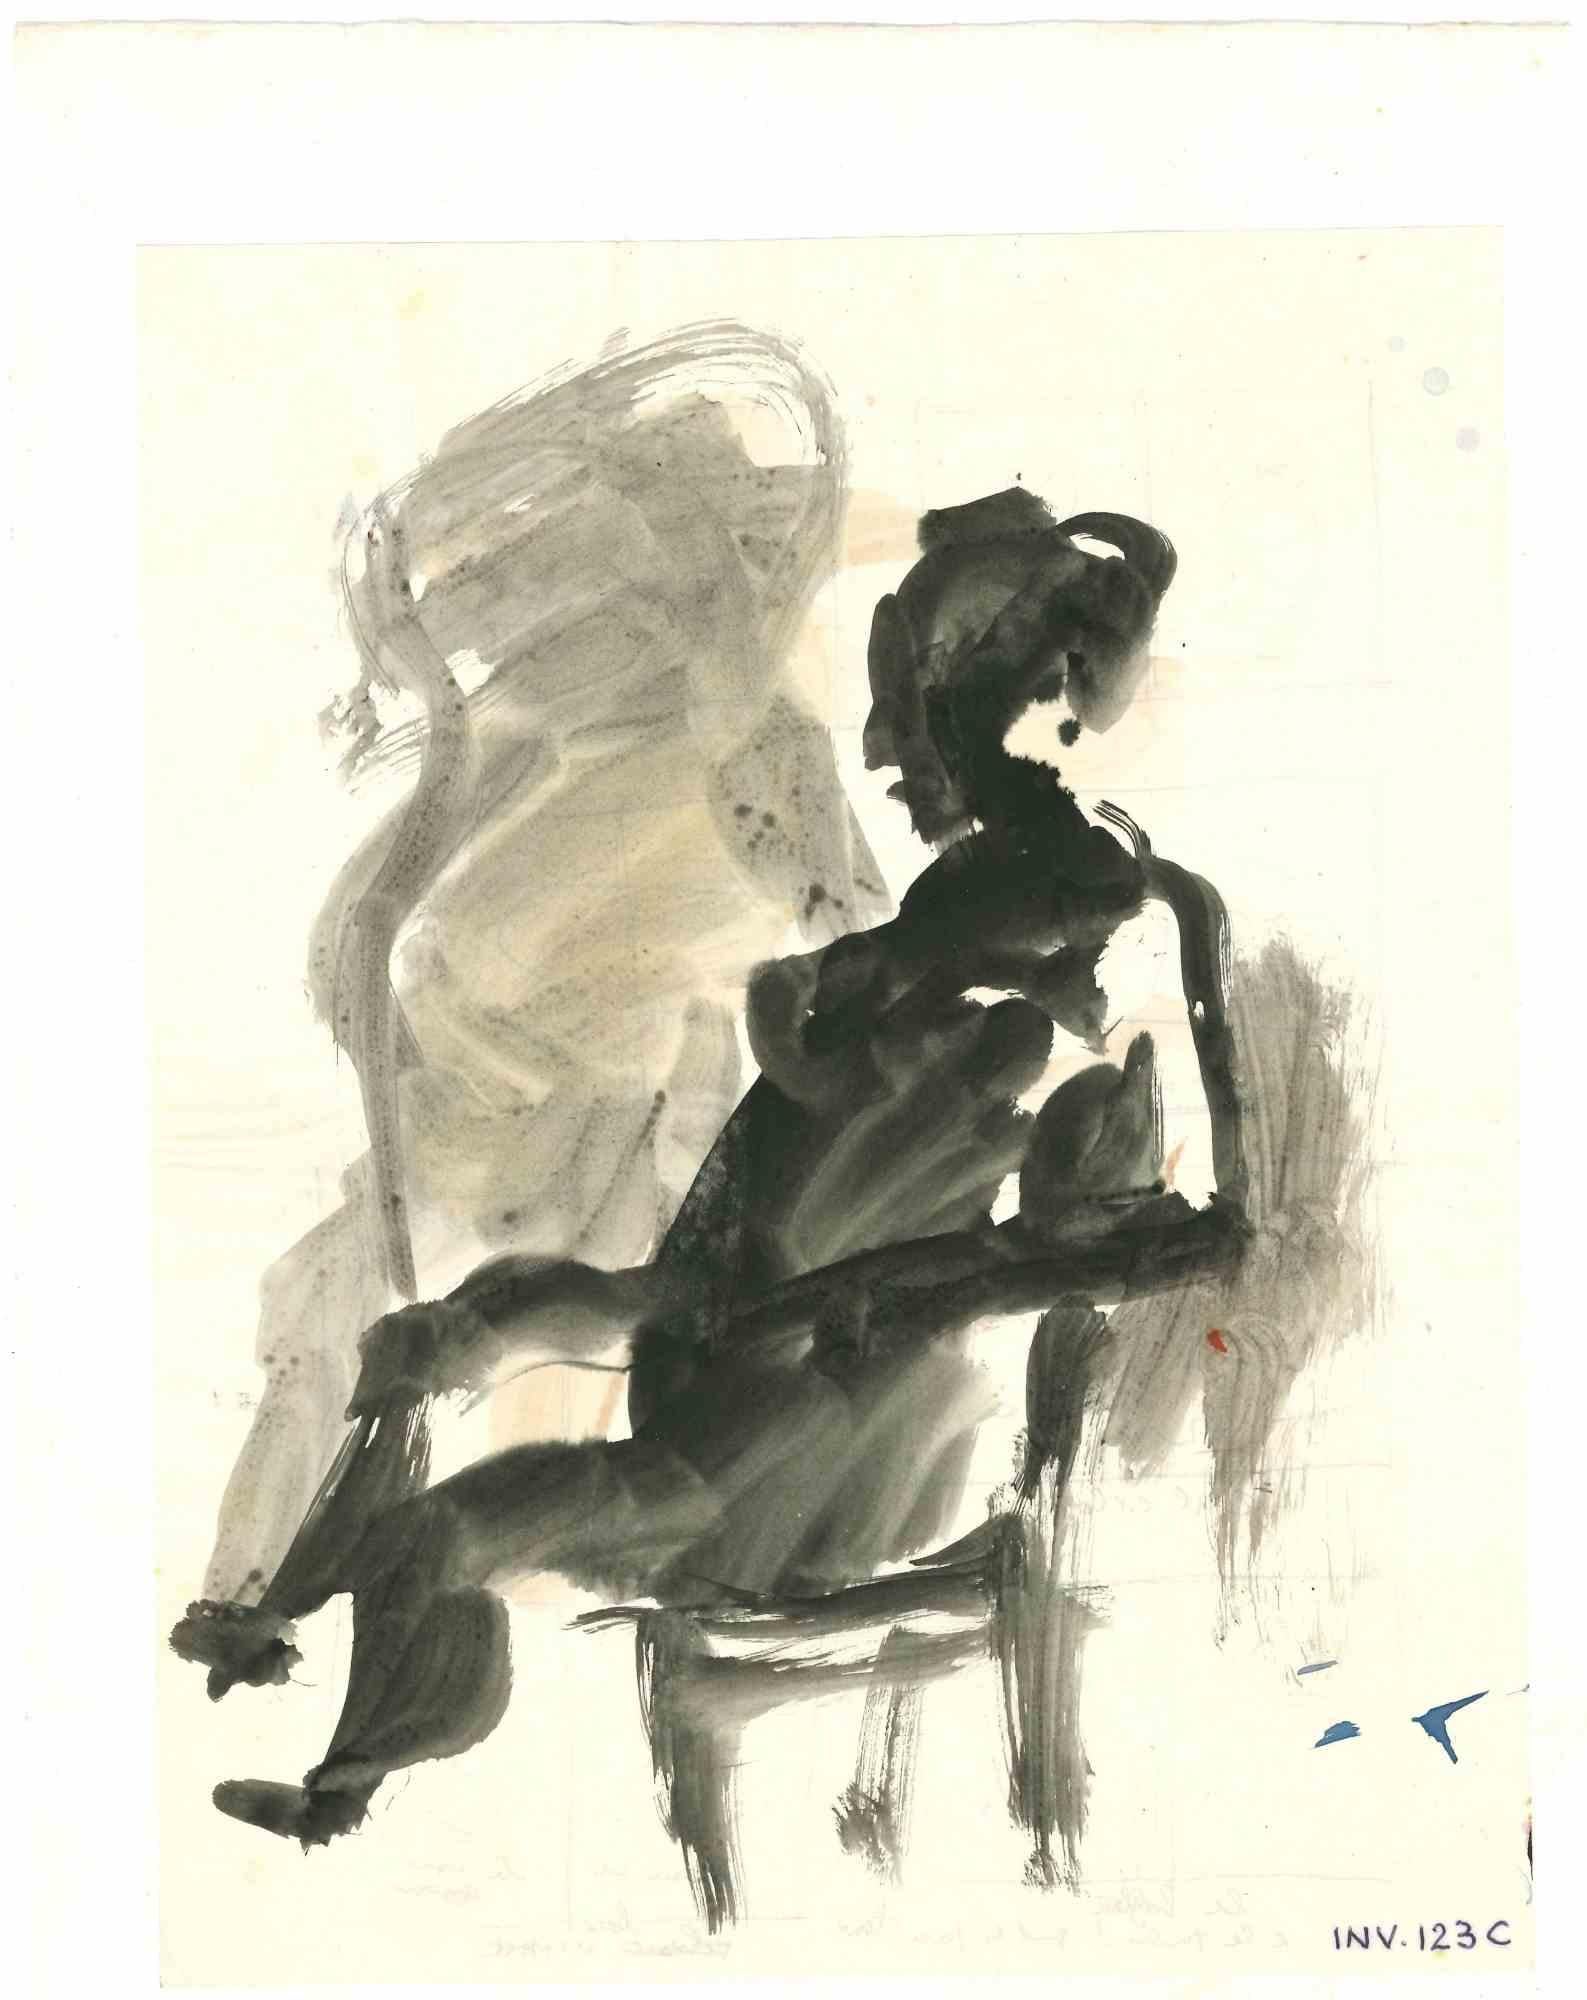 Seated woman and Surreal Scene are two original drawings in ink and watercolor on the front and the rear realized by Leo Guida in the 1970s.

Good condition.

Leo Guida  (1992 - 2017). Sensitive to current issues, artistic movements and historical